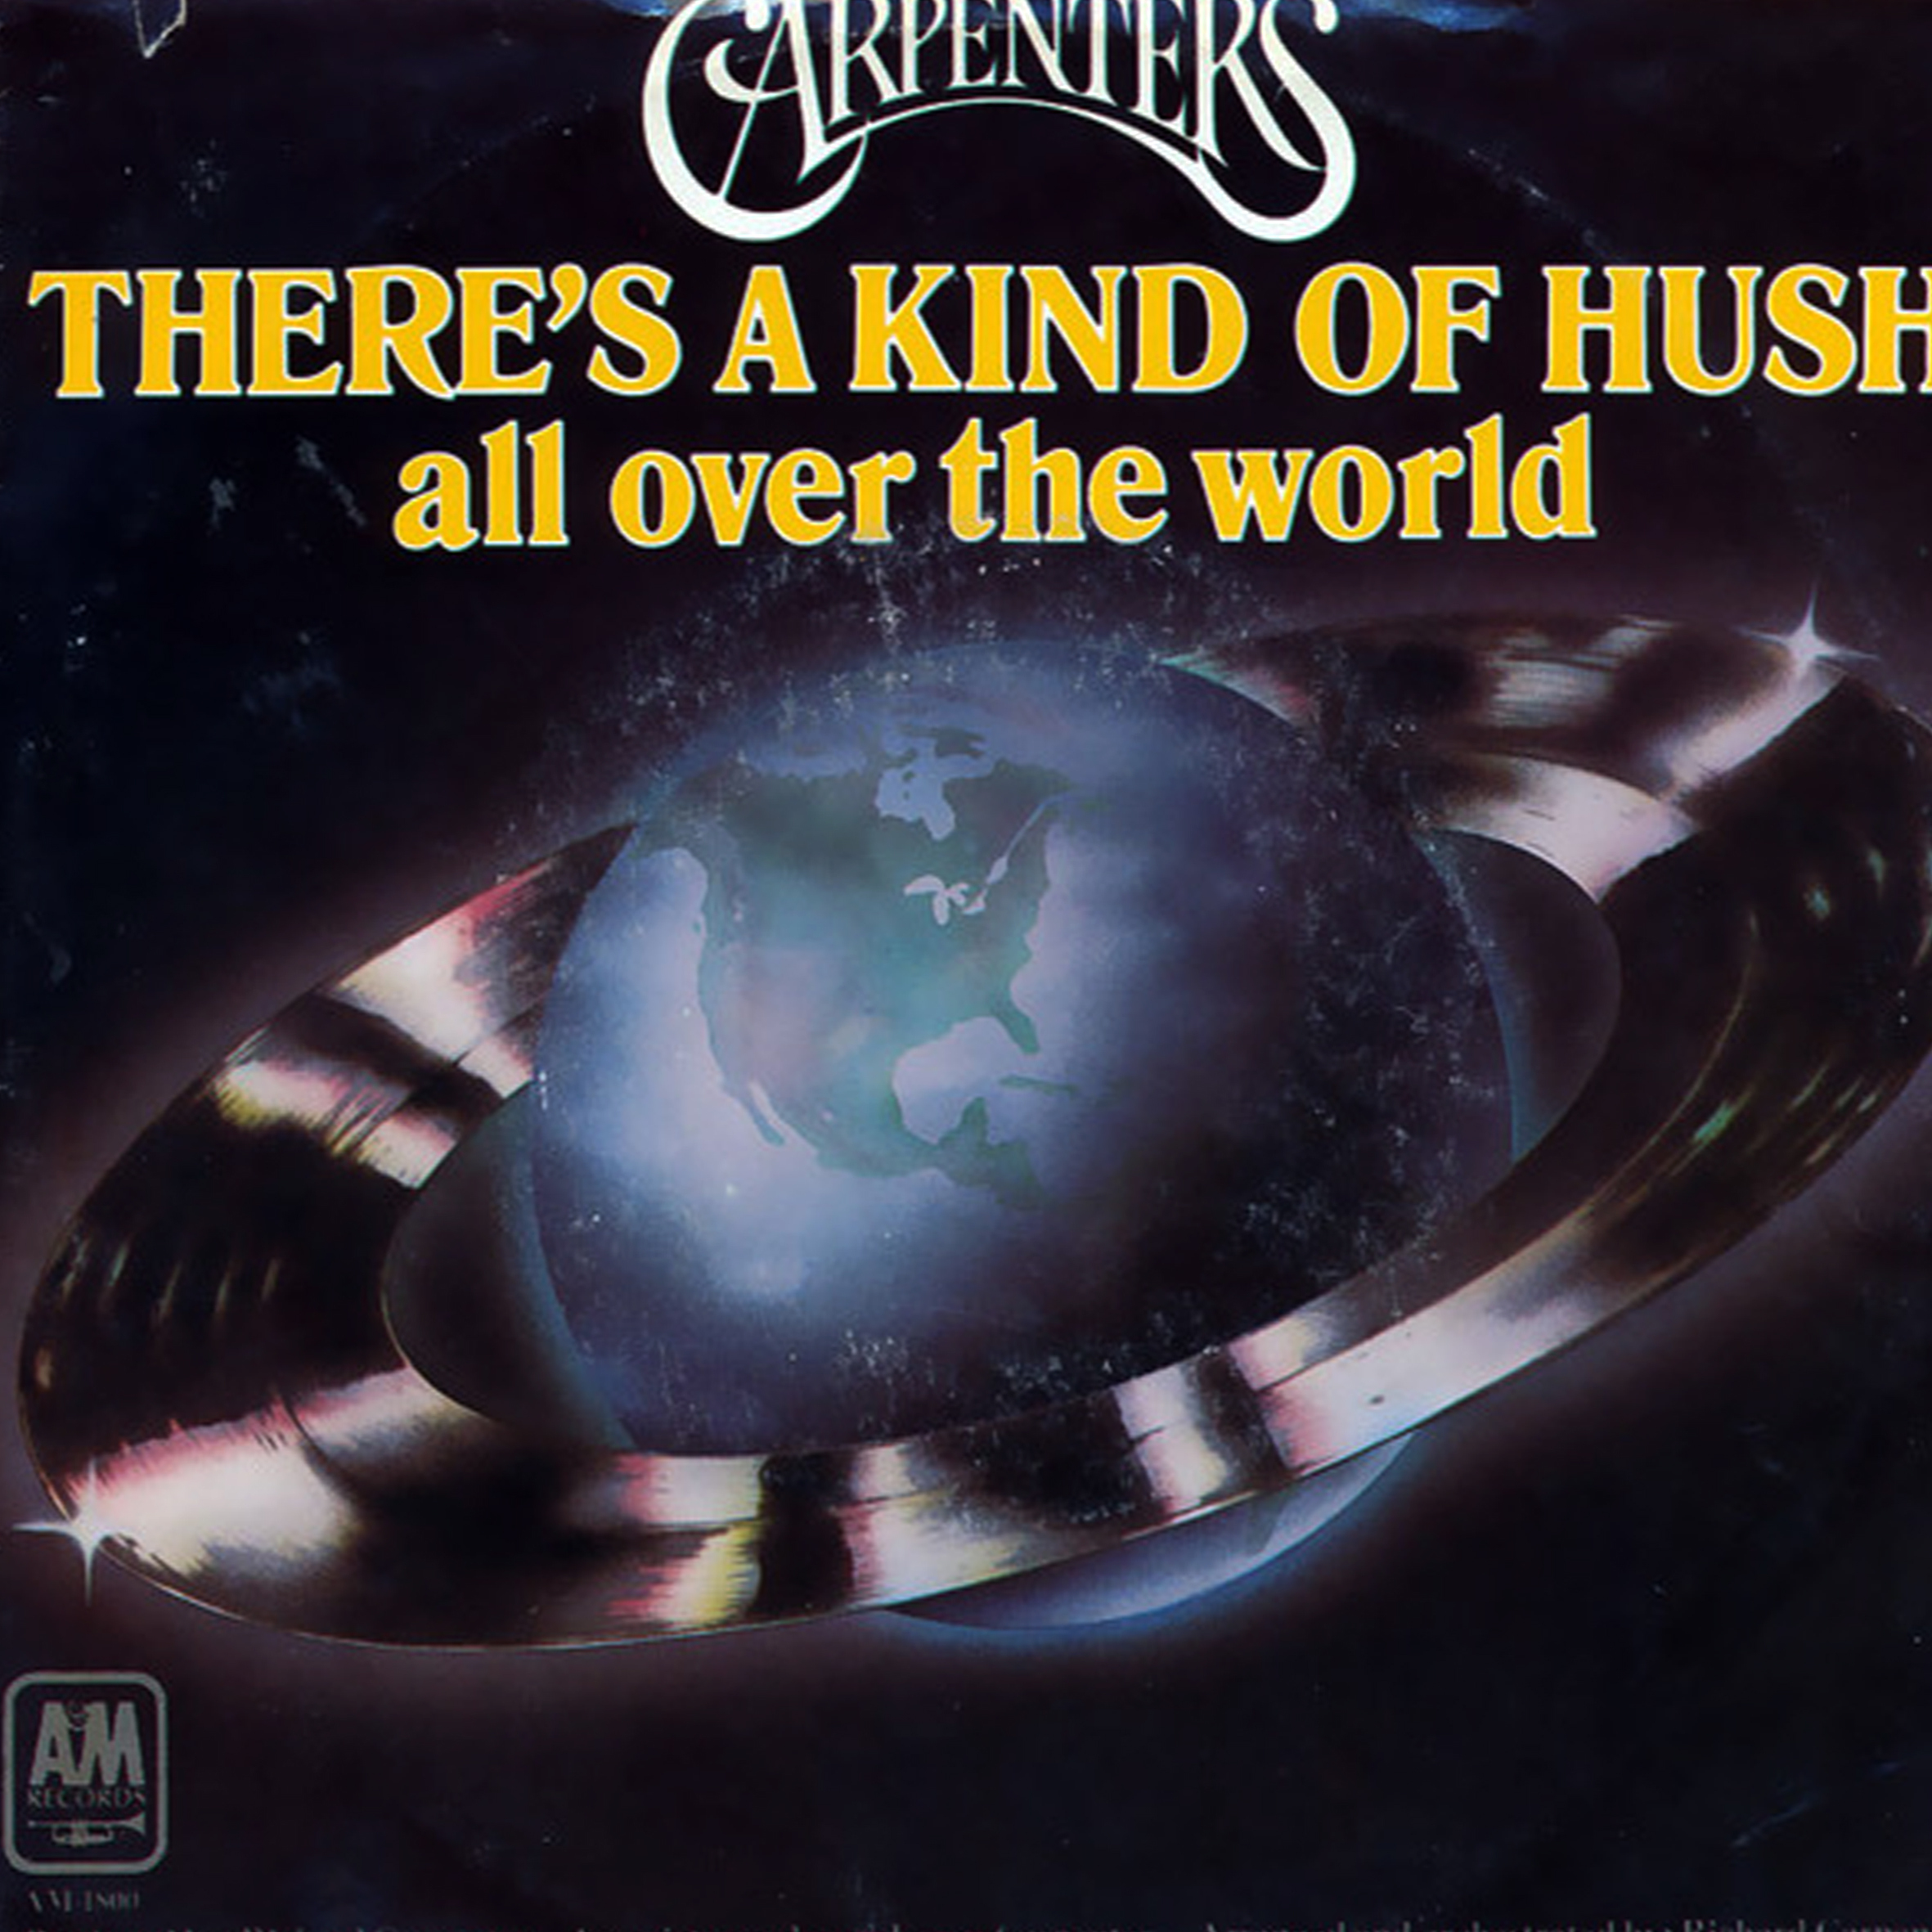 Vinil Compacto - Carpenters - There's A Kind Of Hush (All Over The World)